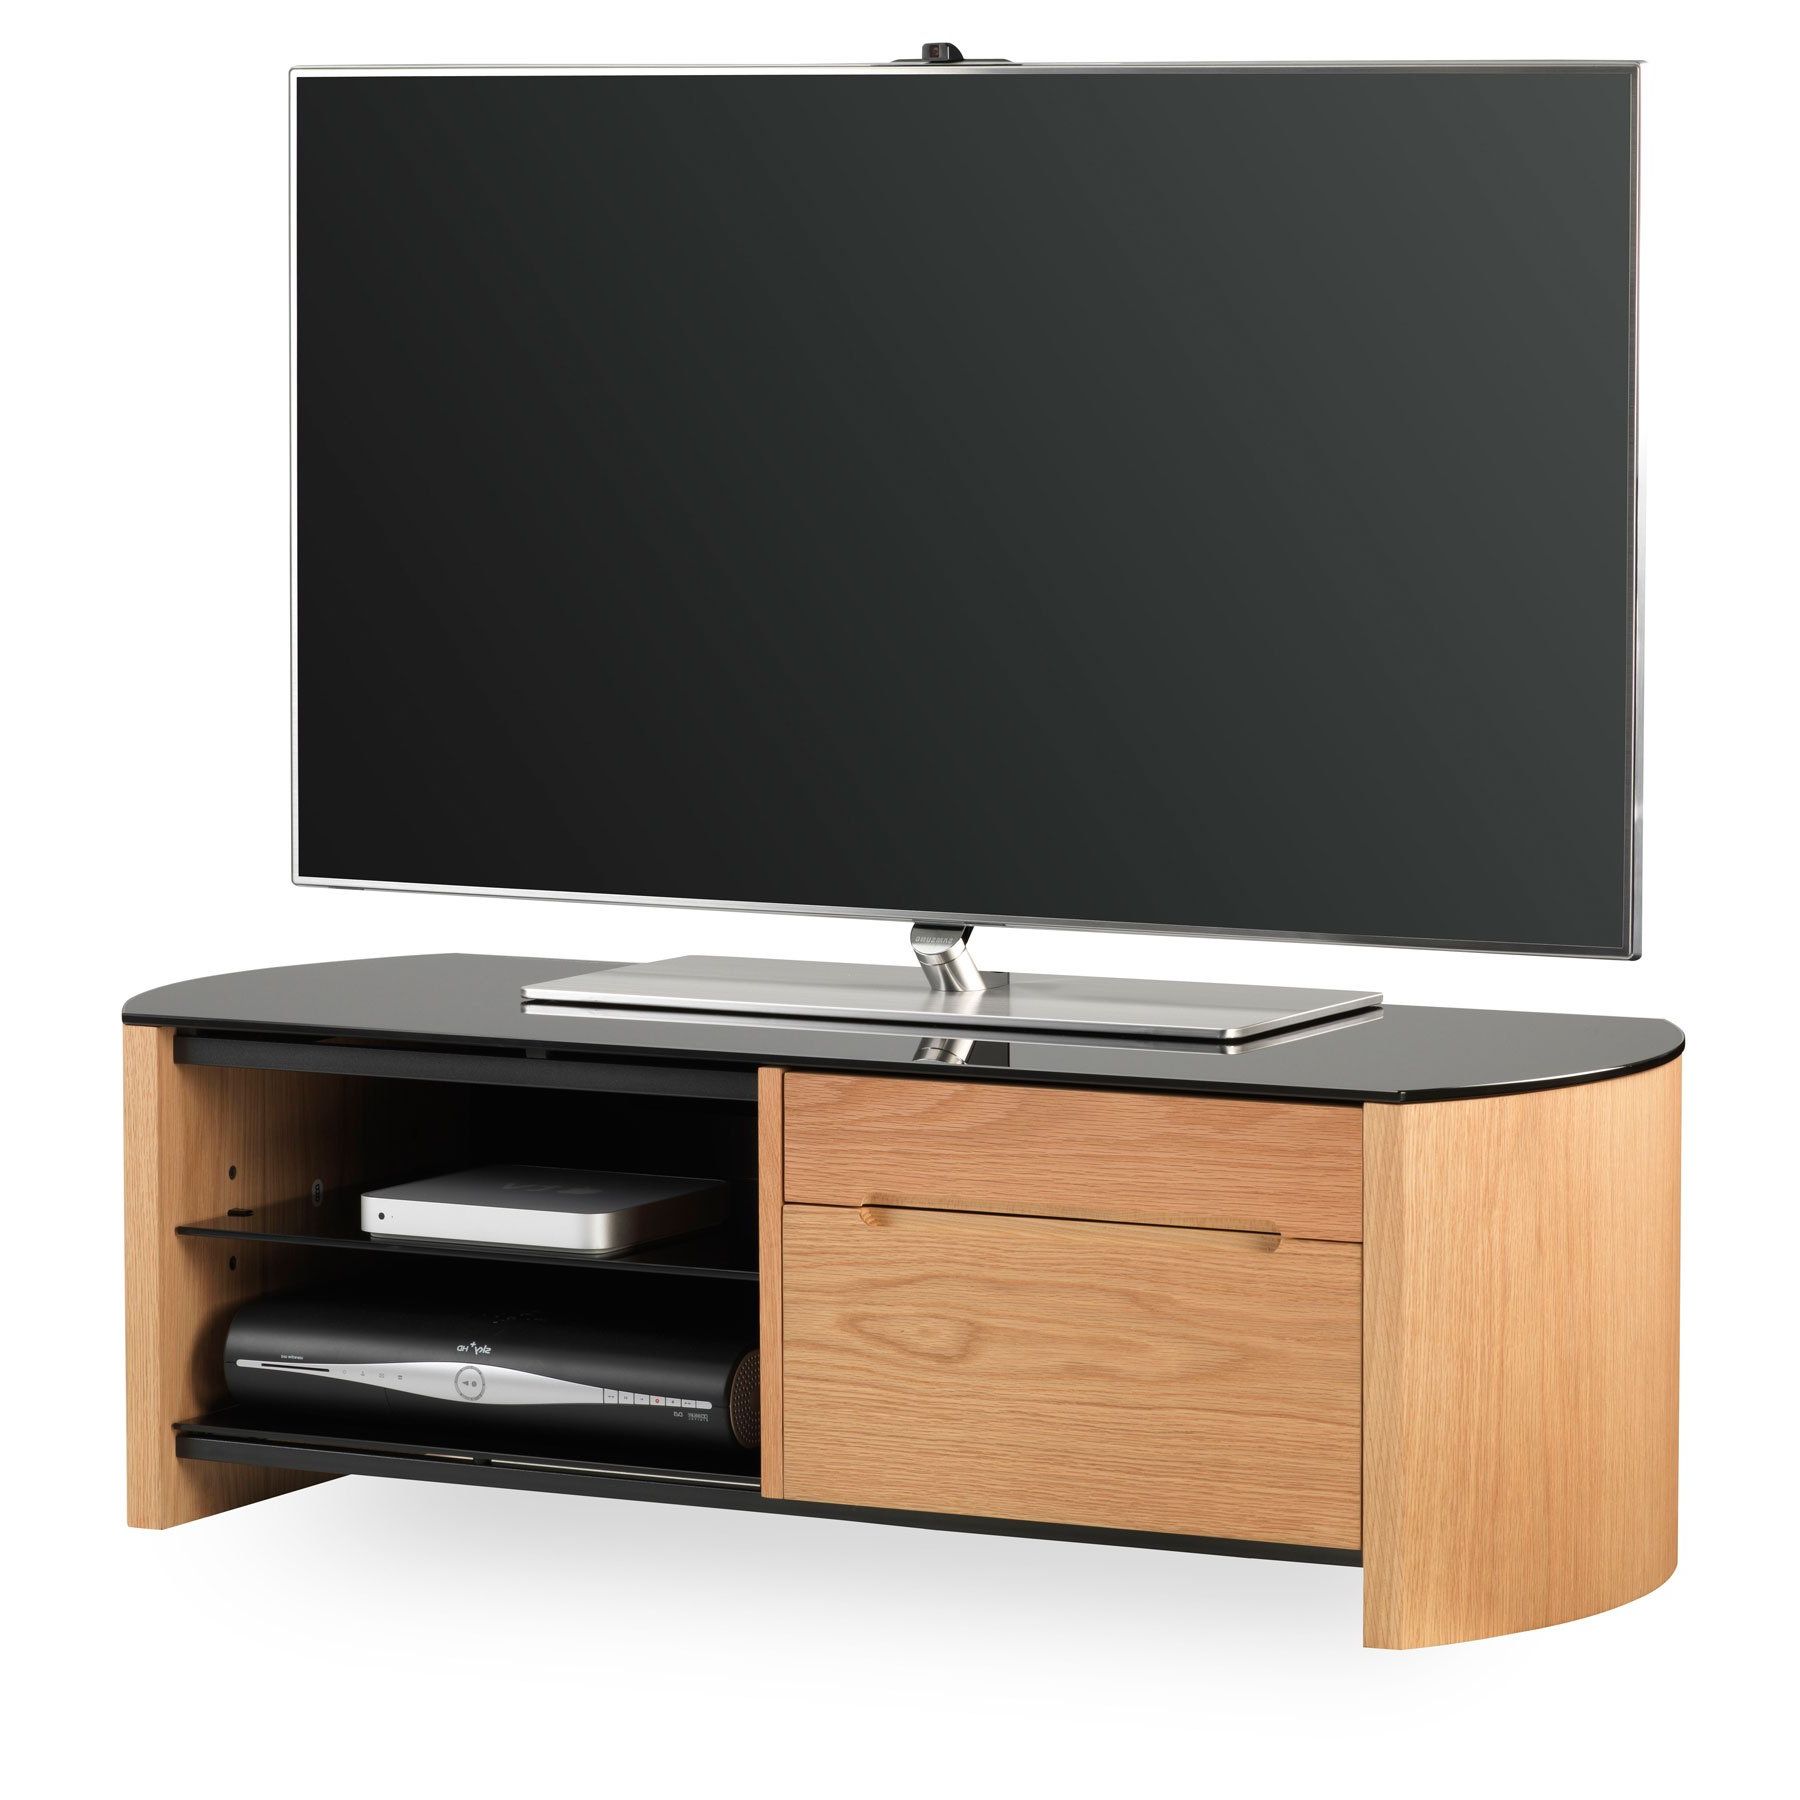 Preferred Alphason Finewood Fw1100cb Light Oak Tv Stand For Up To 50 Pertaining To Lansing Tv Stands For Tvs Up To 50" (View 11 of 25)